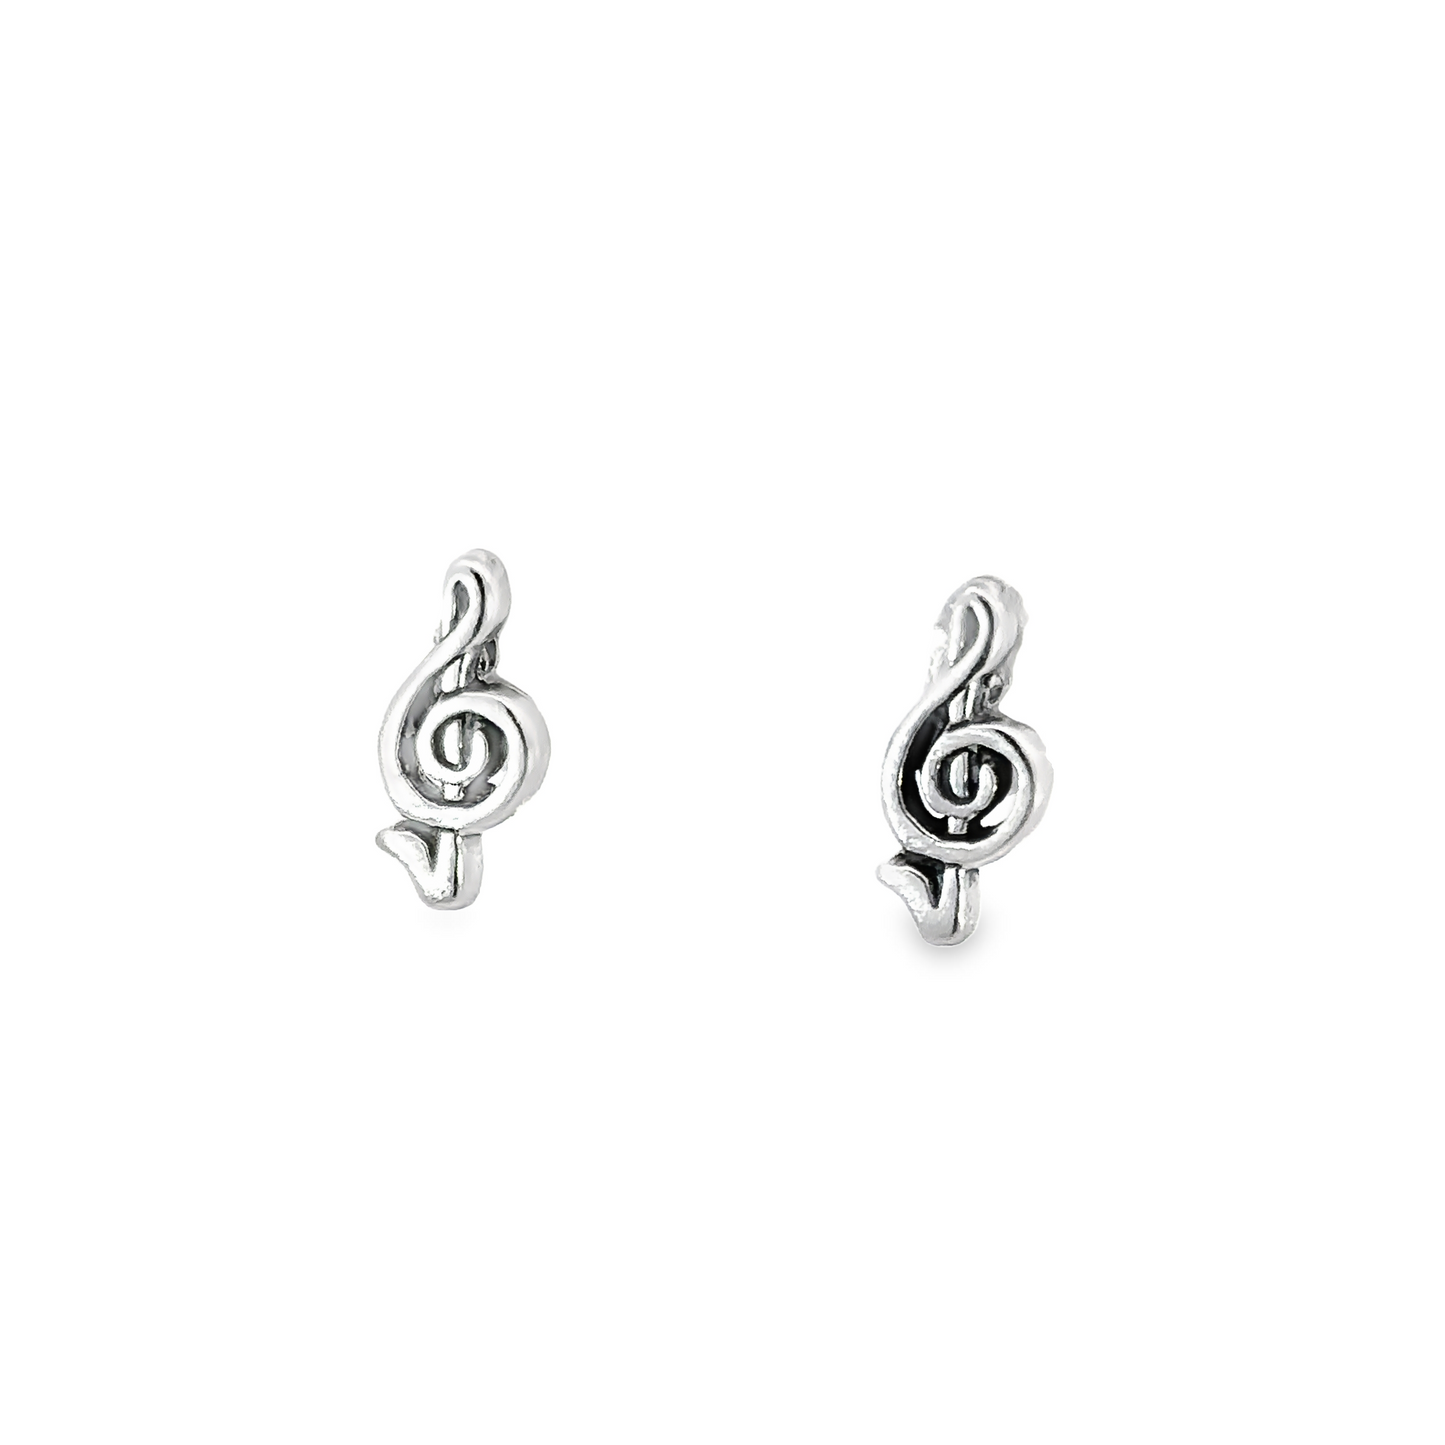 A pair of silver Treble Clef Studs, perfect for music lovers.